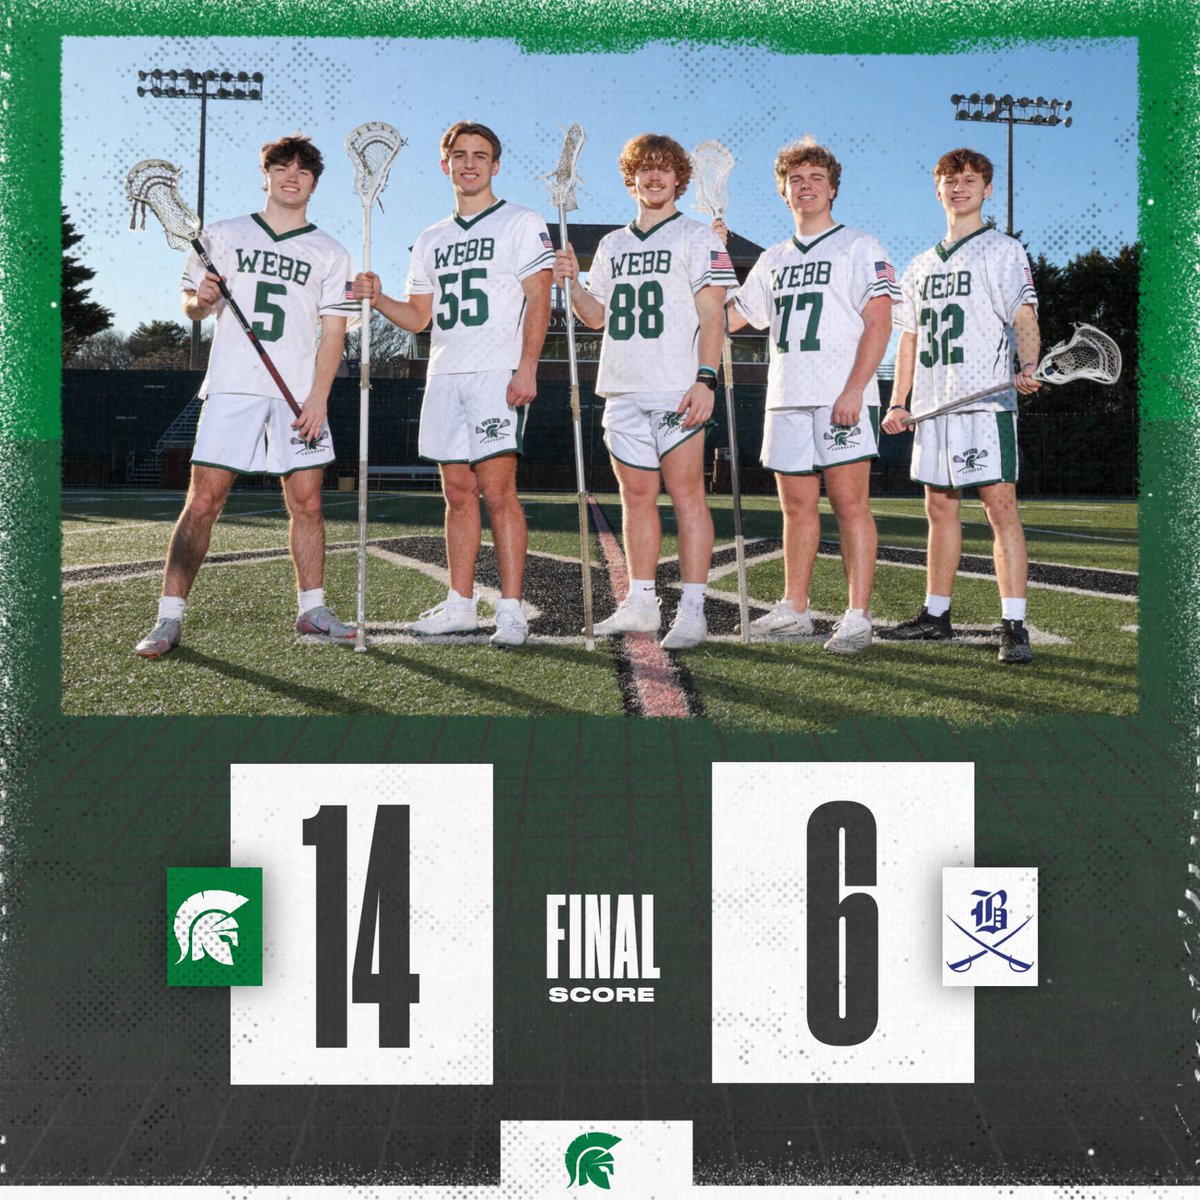 BOYS LACROSSE RESULTS 🥍 The Spartans finished as Regular Season Region Champions after defeating Boyd Buchanan on the road Friday night. They host CAK Friday night in a State Quarterfinal matchup. #GoSpartans ⚔️🟢⚪️